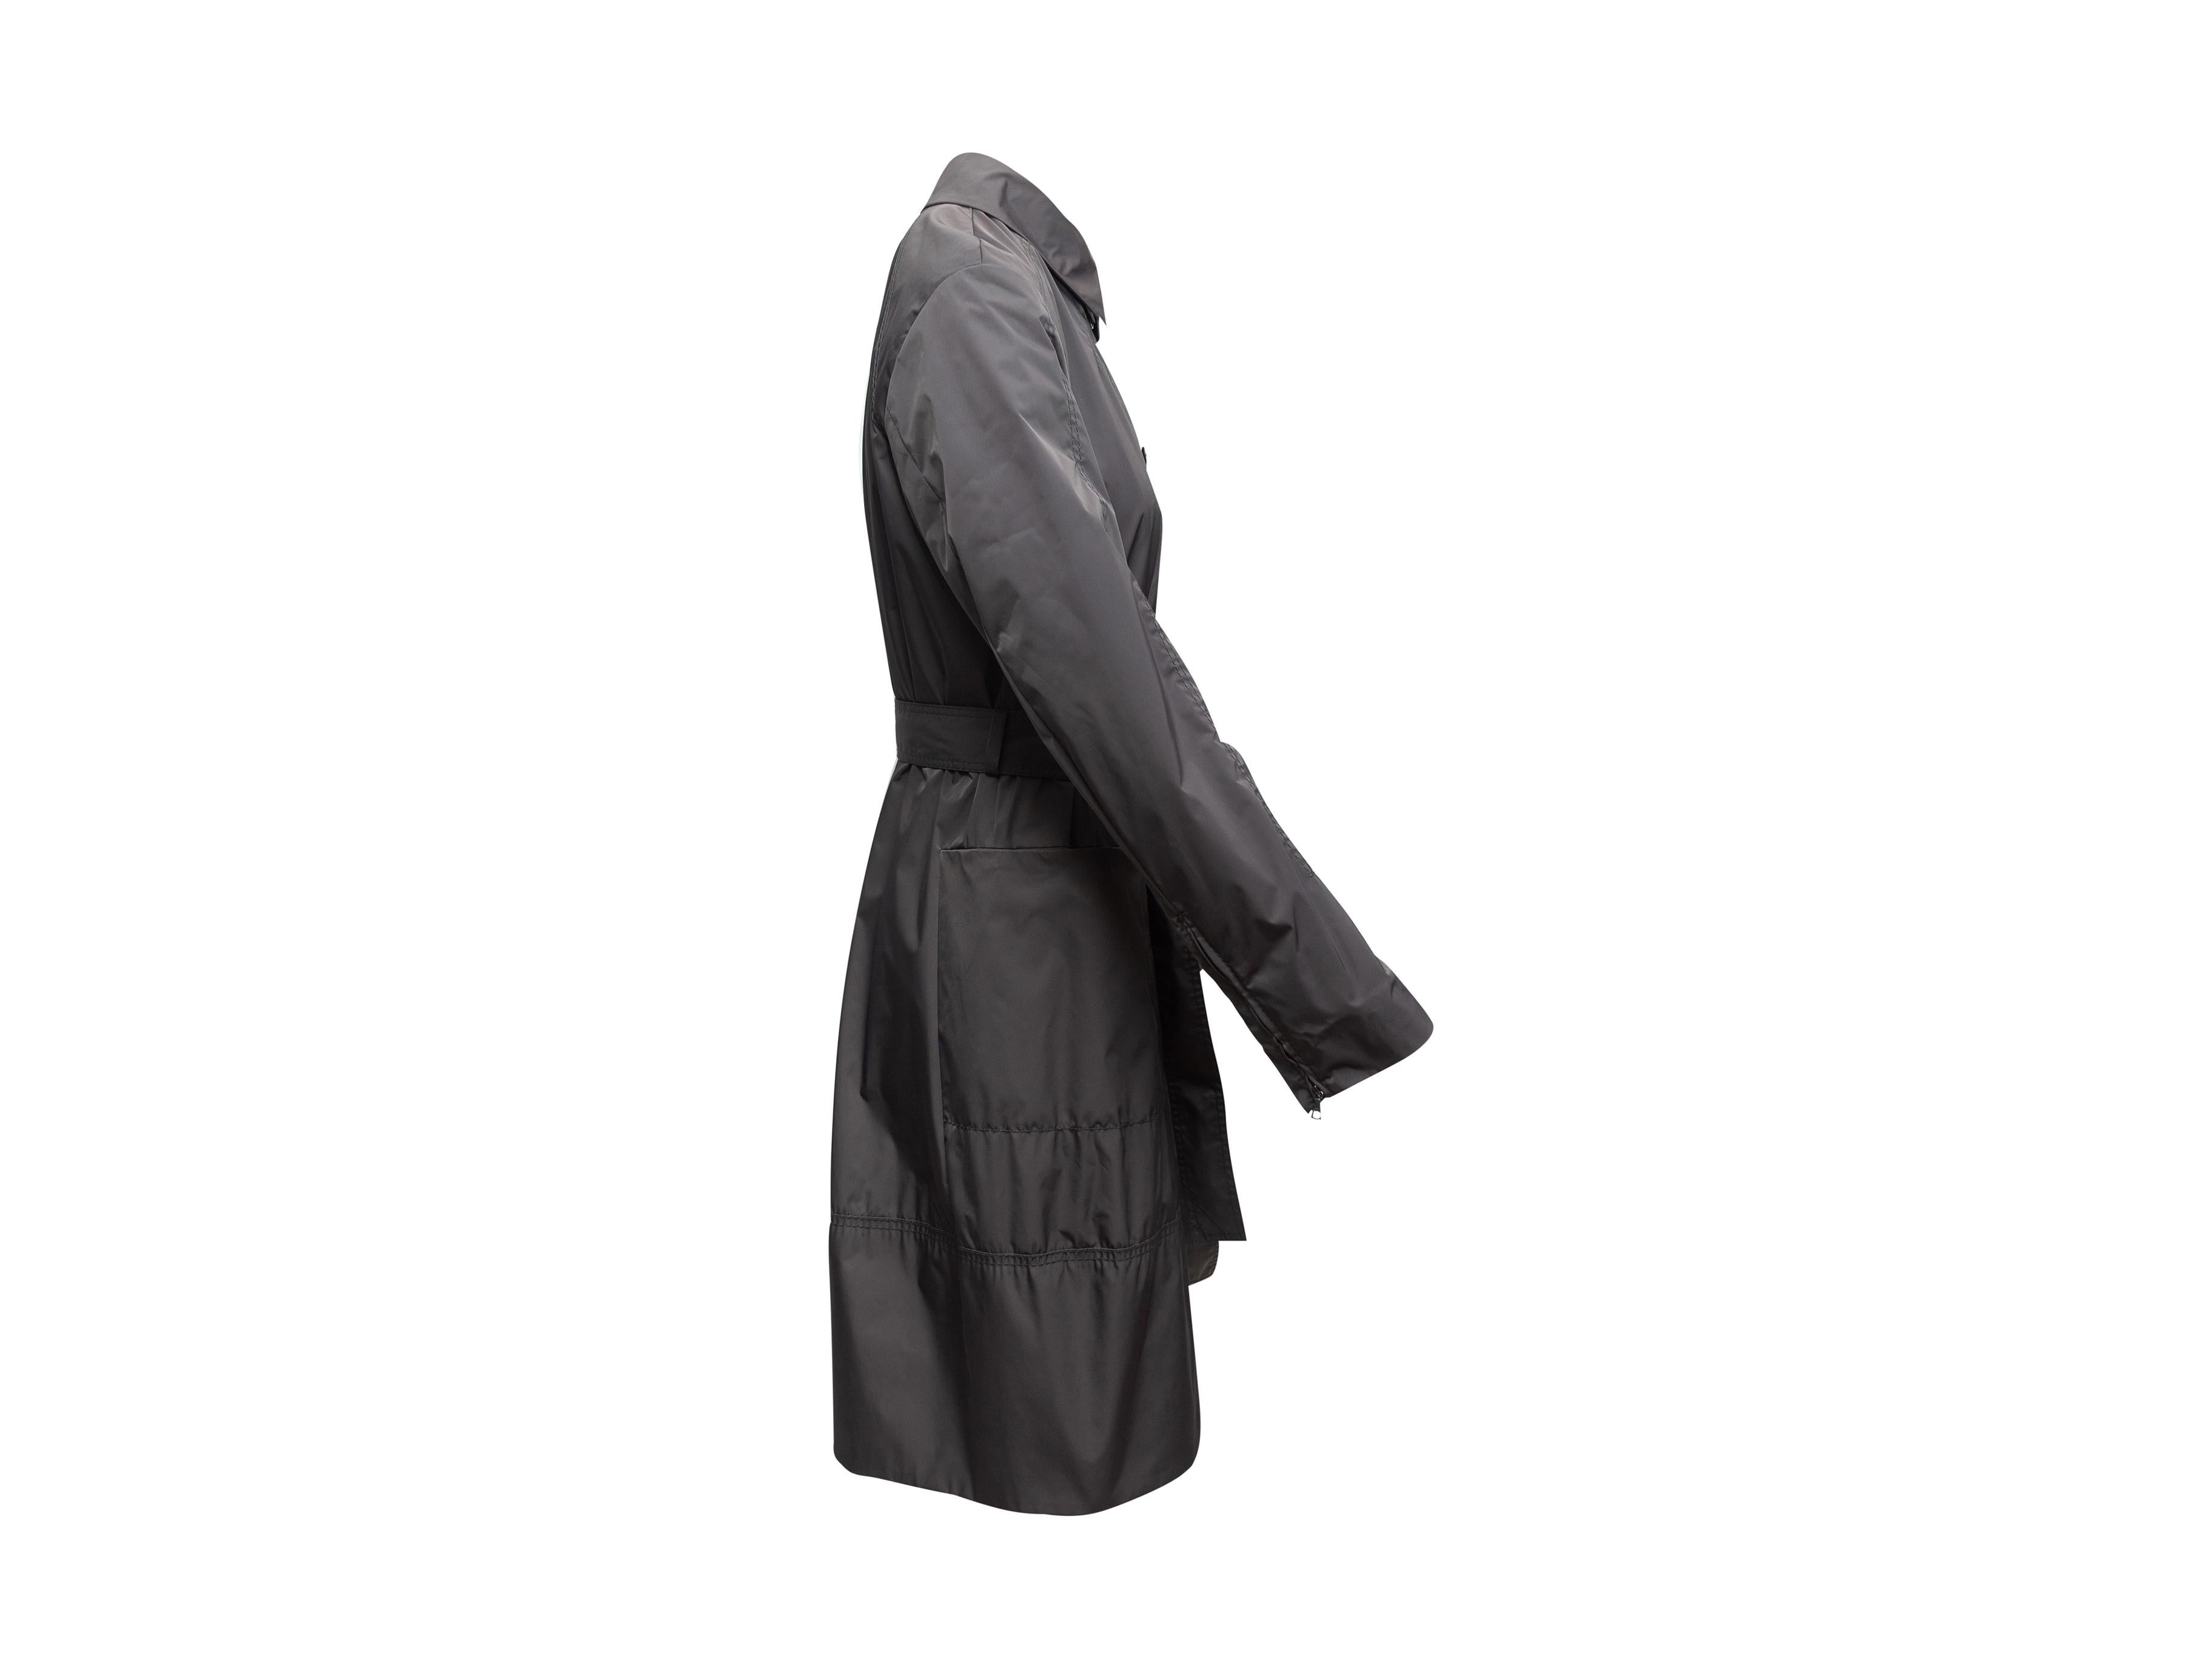 Product details: Charcoal grey nylon trench coat by Boss. Pointed collar. Dual hip pockets. Sash tie at waist. Button closures at center front. 40